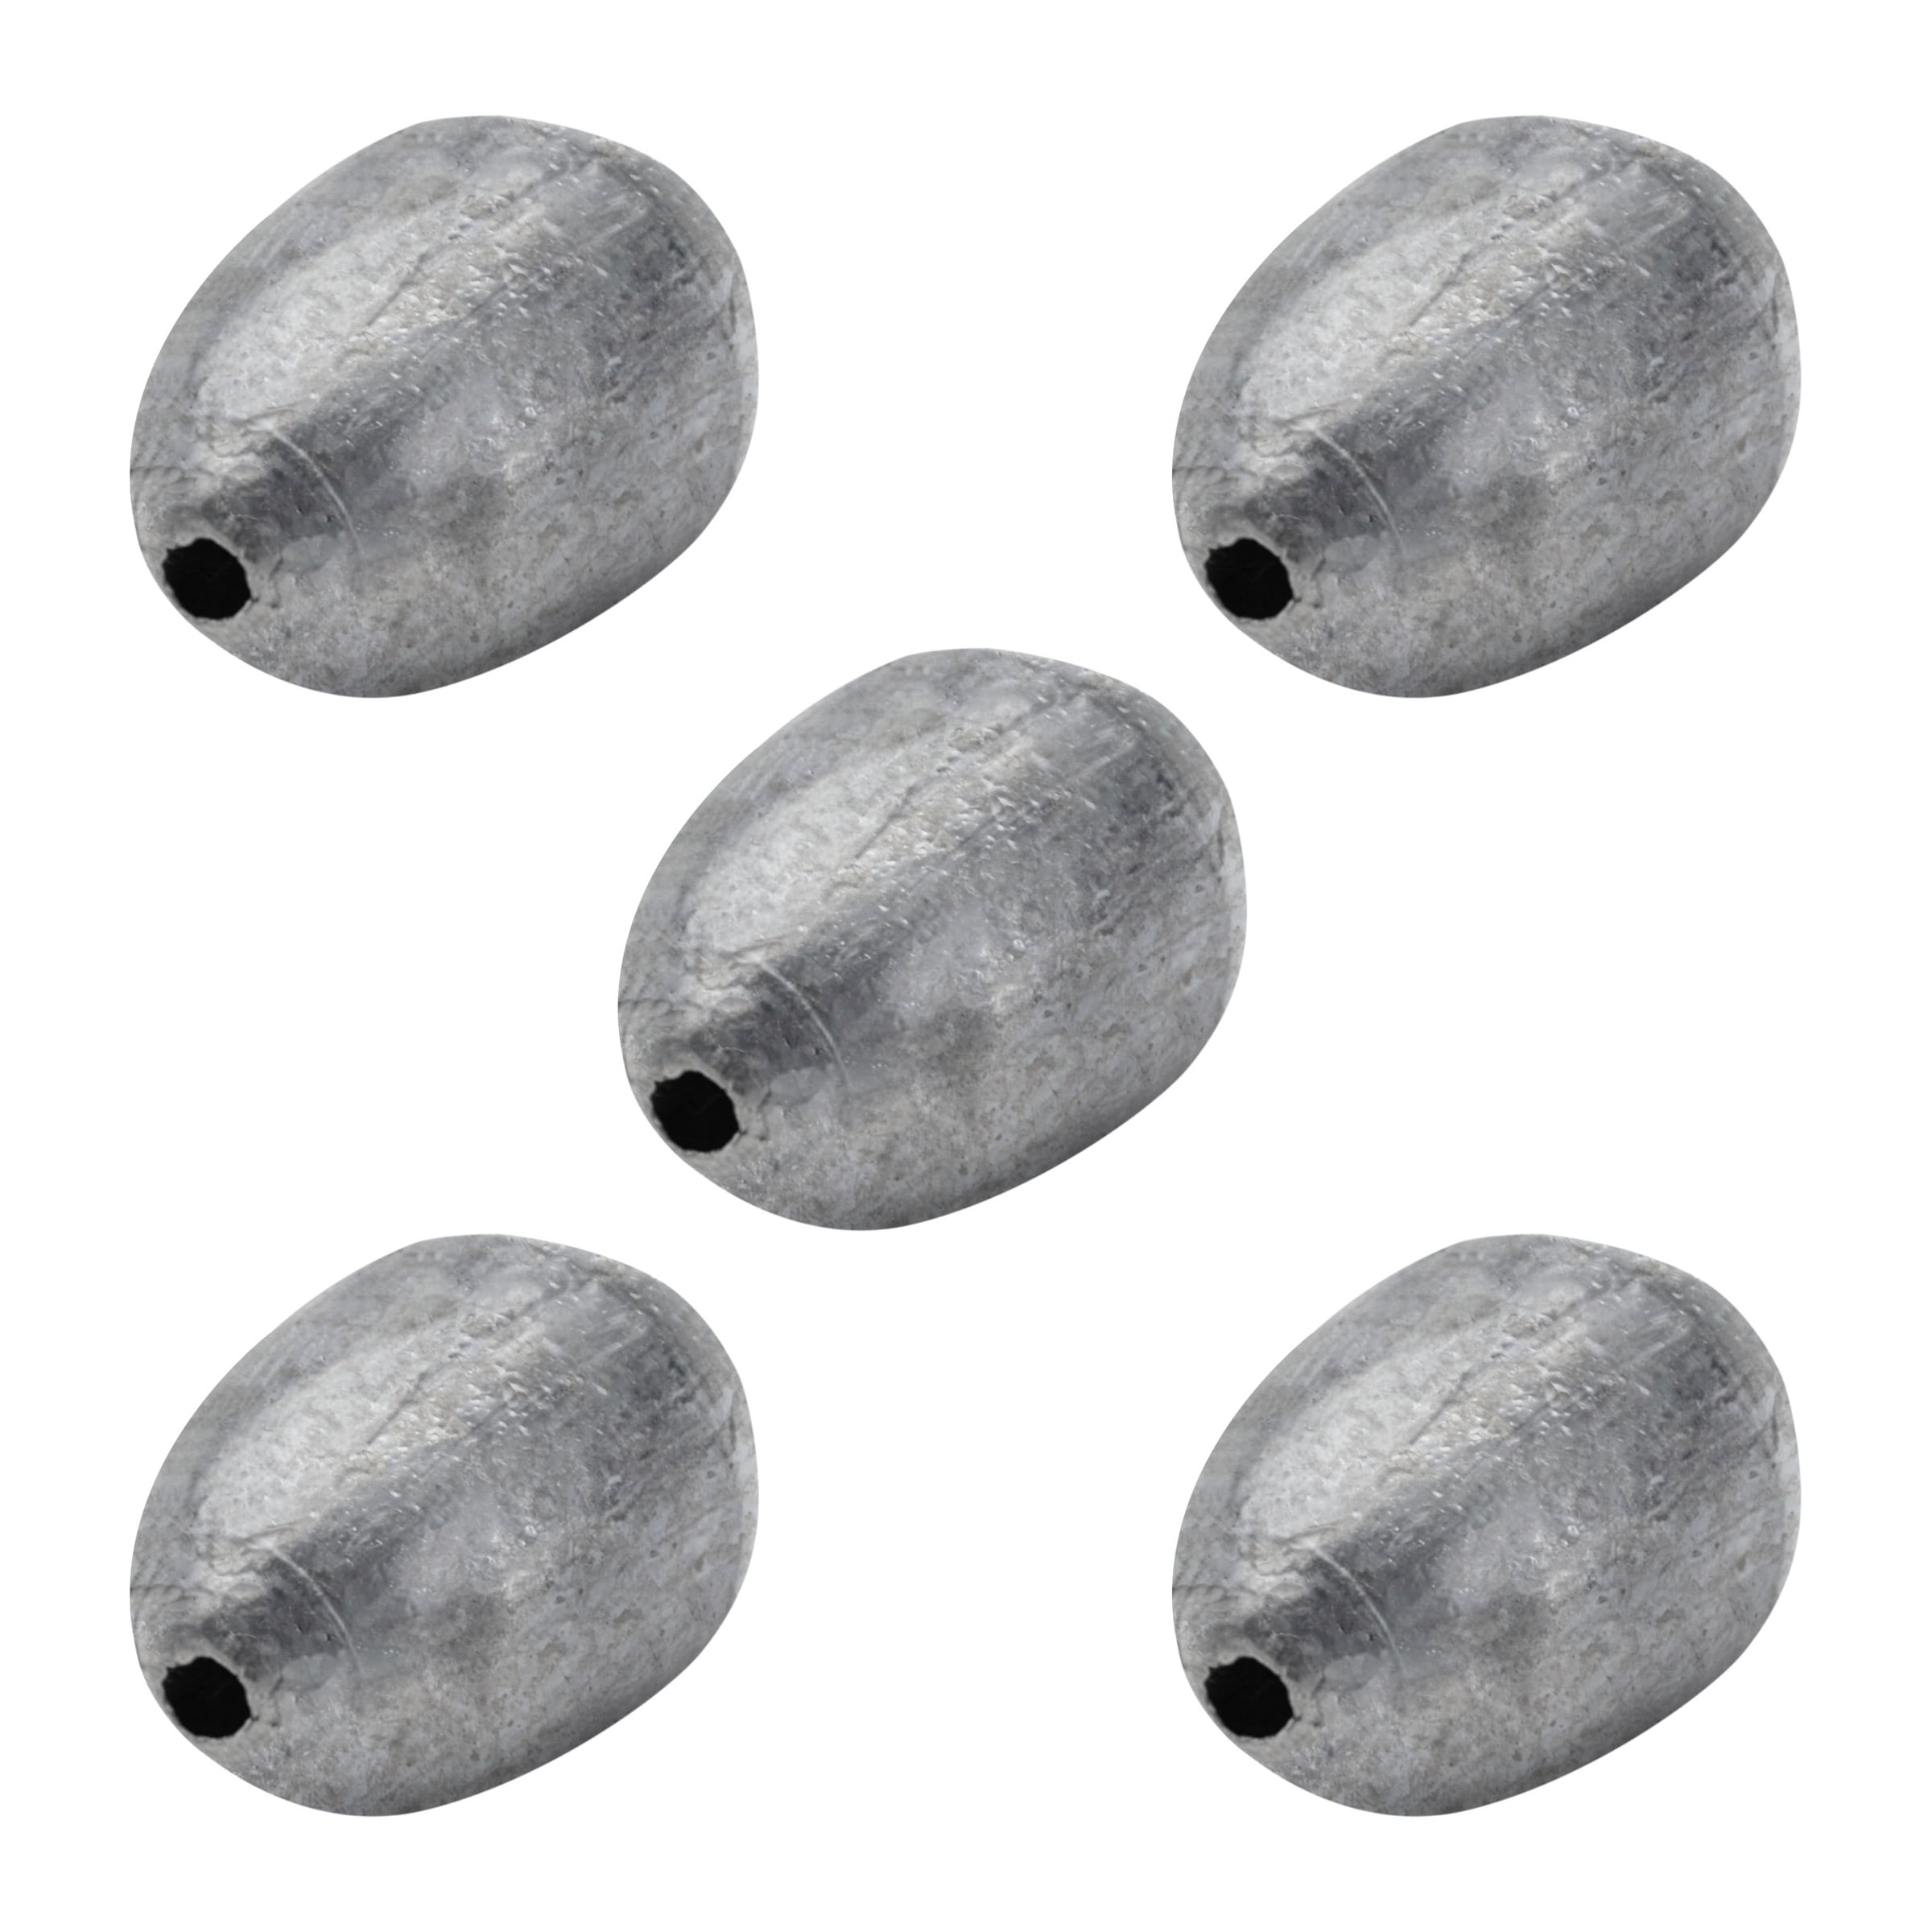 South Bend Large Egg Sinkers Fishing Weights Terminal Tackle, 3 oz